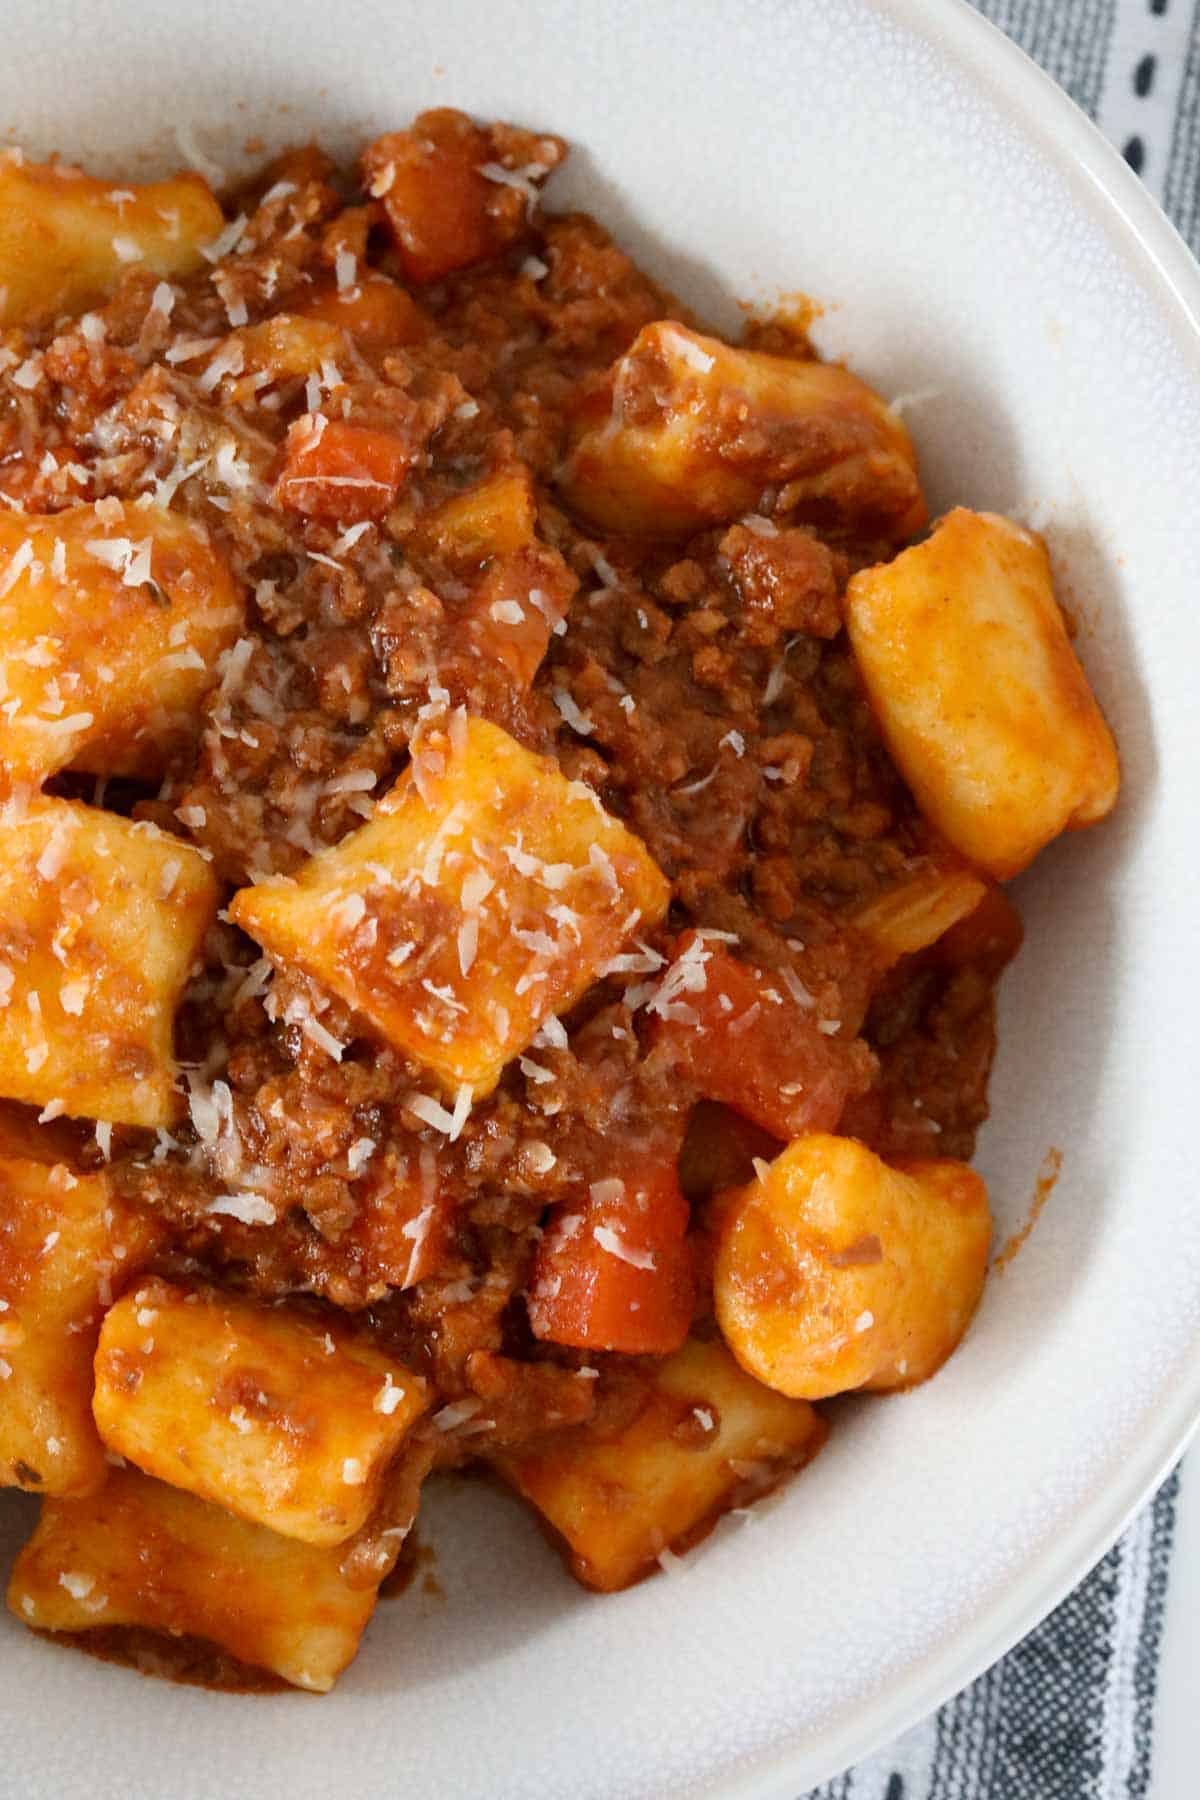 A bowl of ricotta gnocchi served with bolognese sauce.